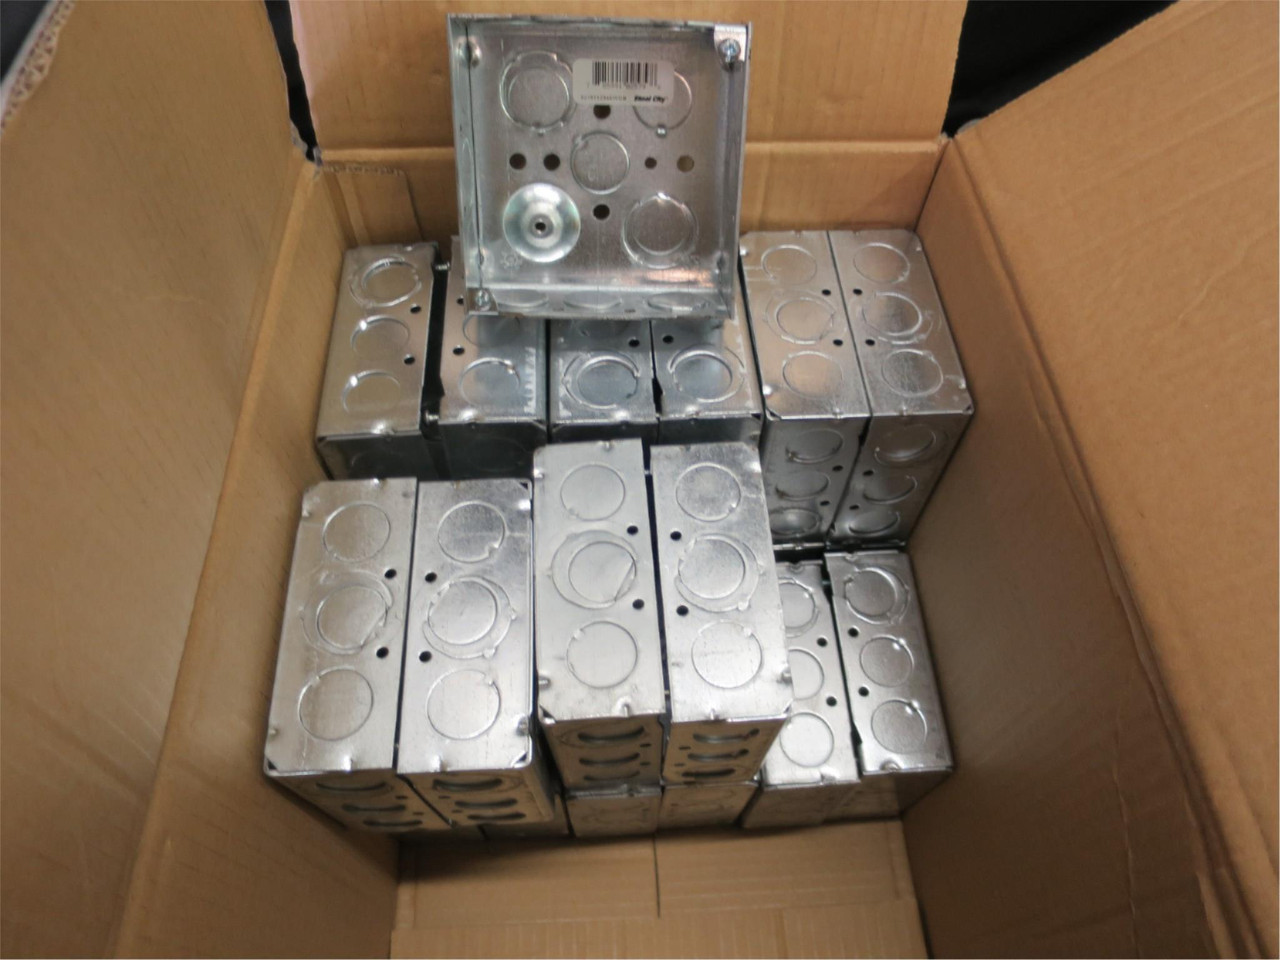 4" Square Metallic Outlet Box with Ground Galvanized Steel